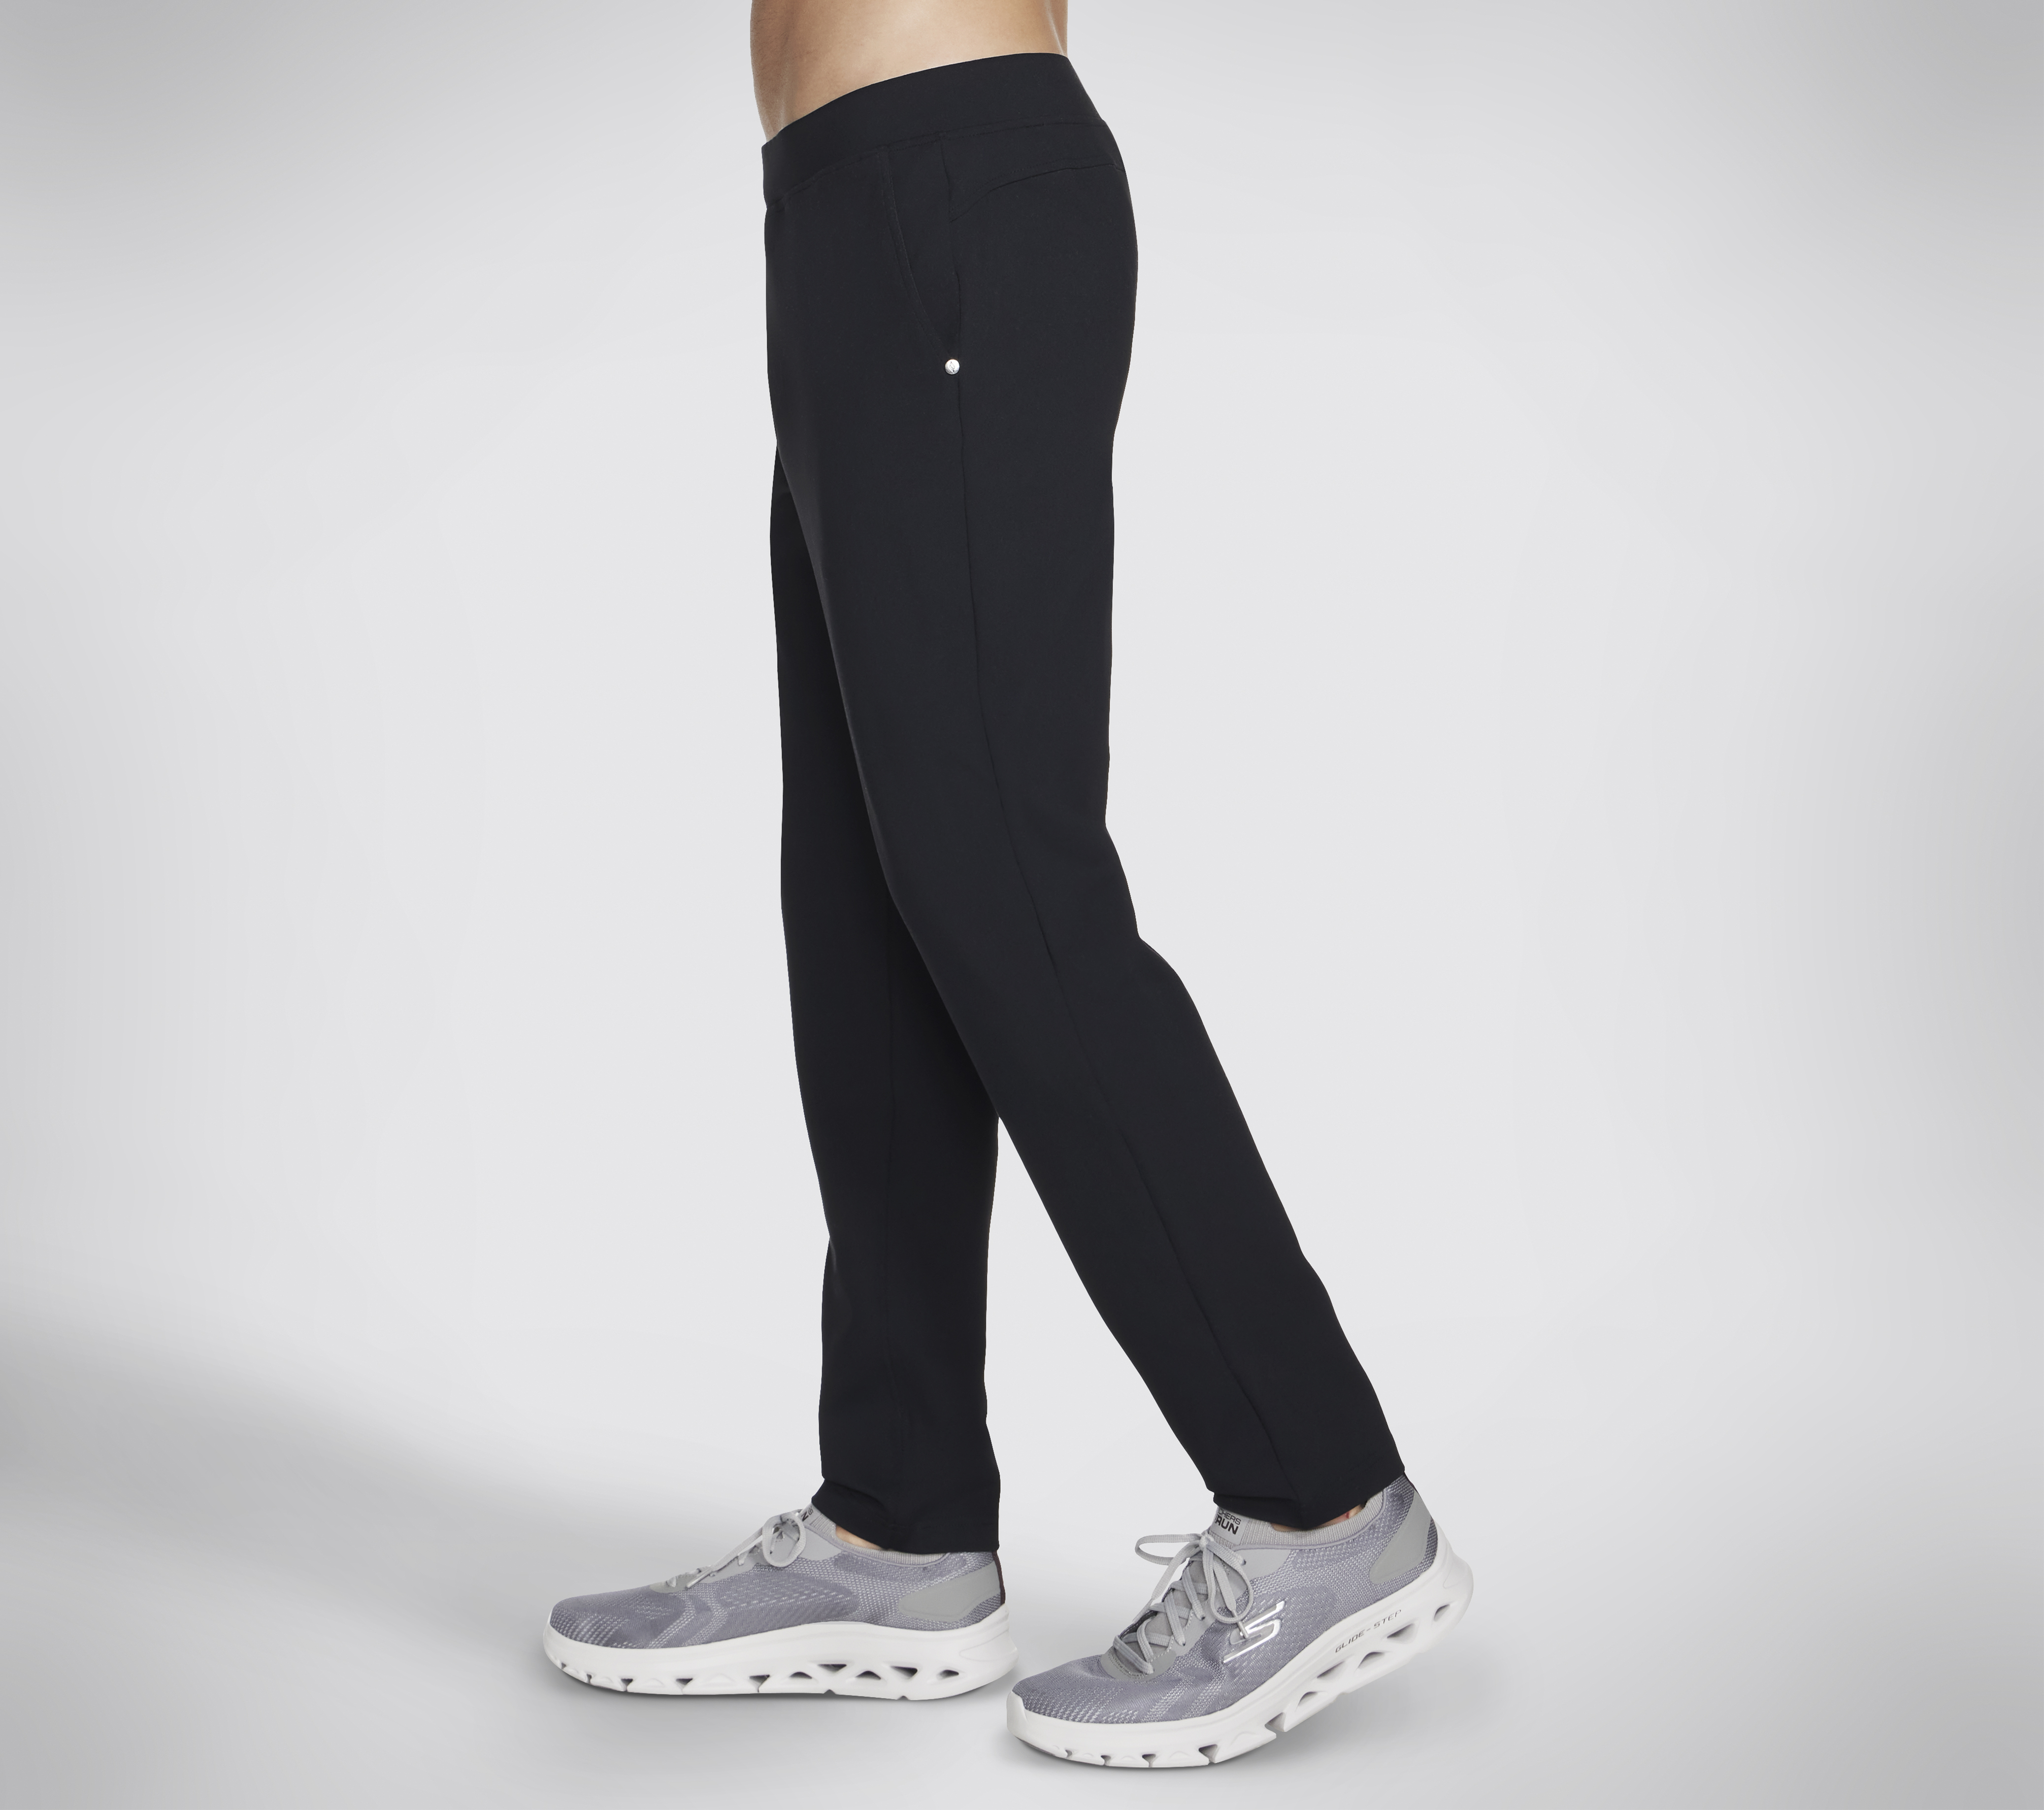 Shop the Skechers Slip-Ins Pant Controller Tapered